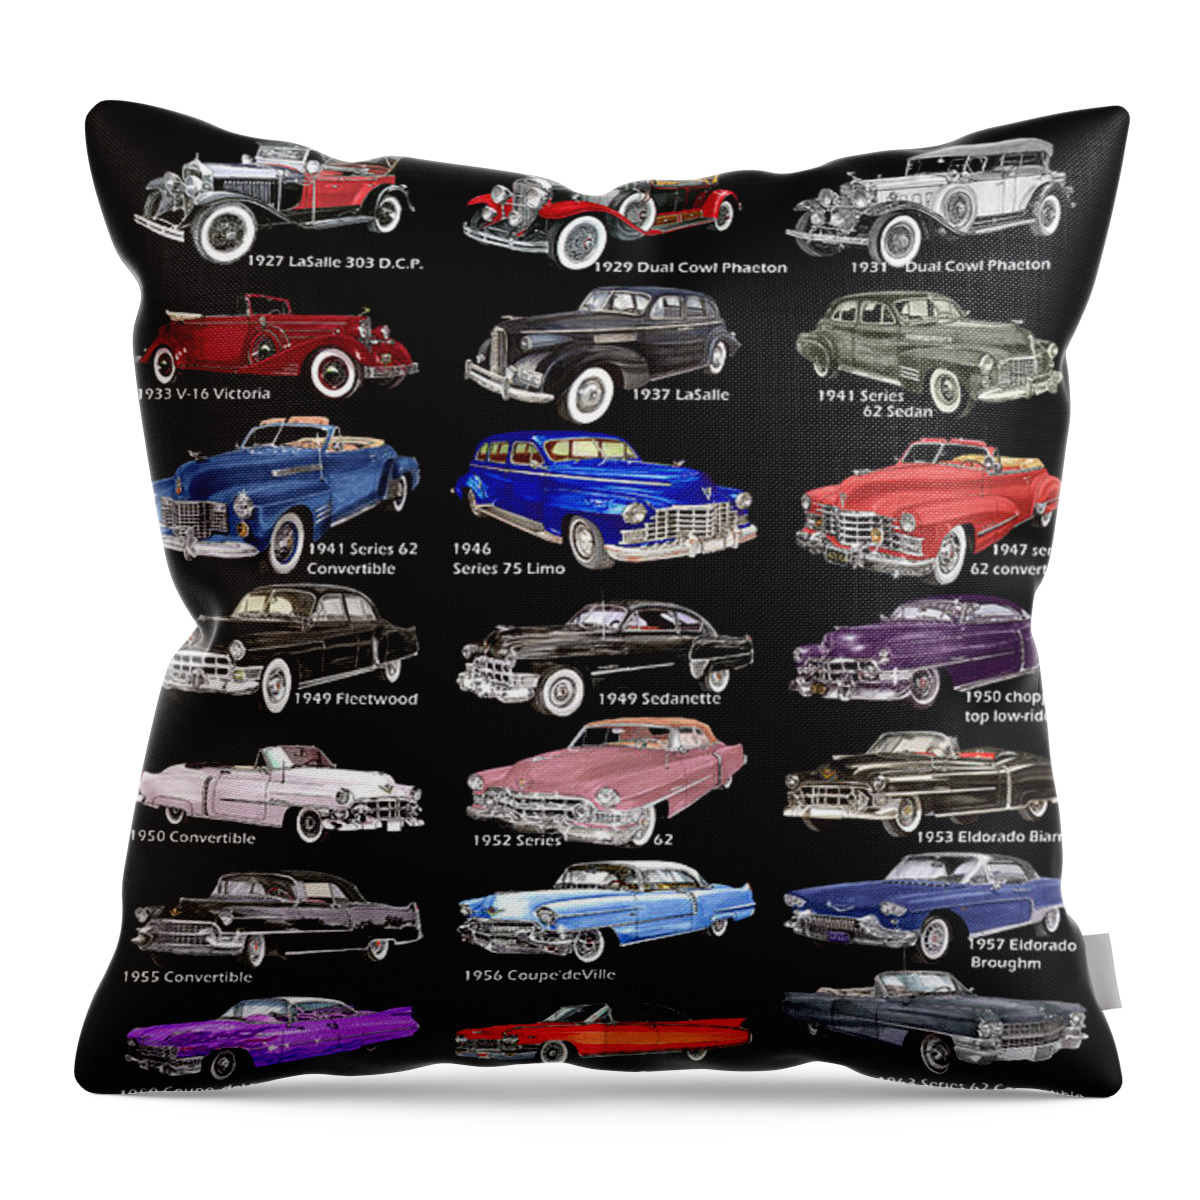 Watercolor Art Of 1902 Cadillac Art Prints Of Garage Art Posters Throw Pillow featuring the painting Never Enough Cadillacs by Jack Pumphrey